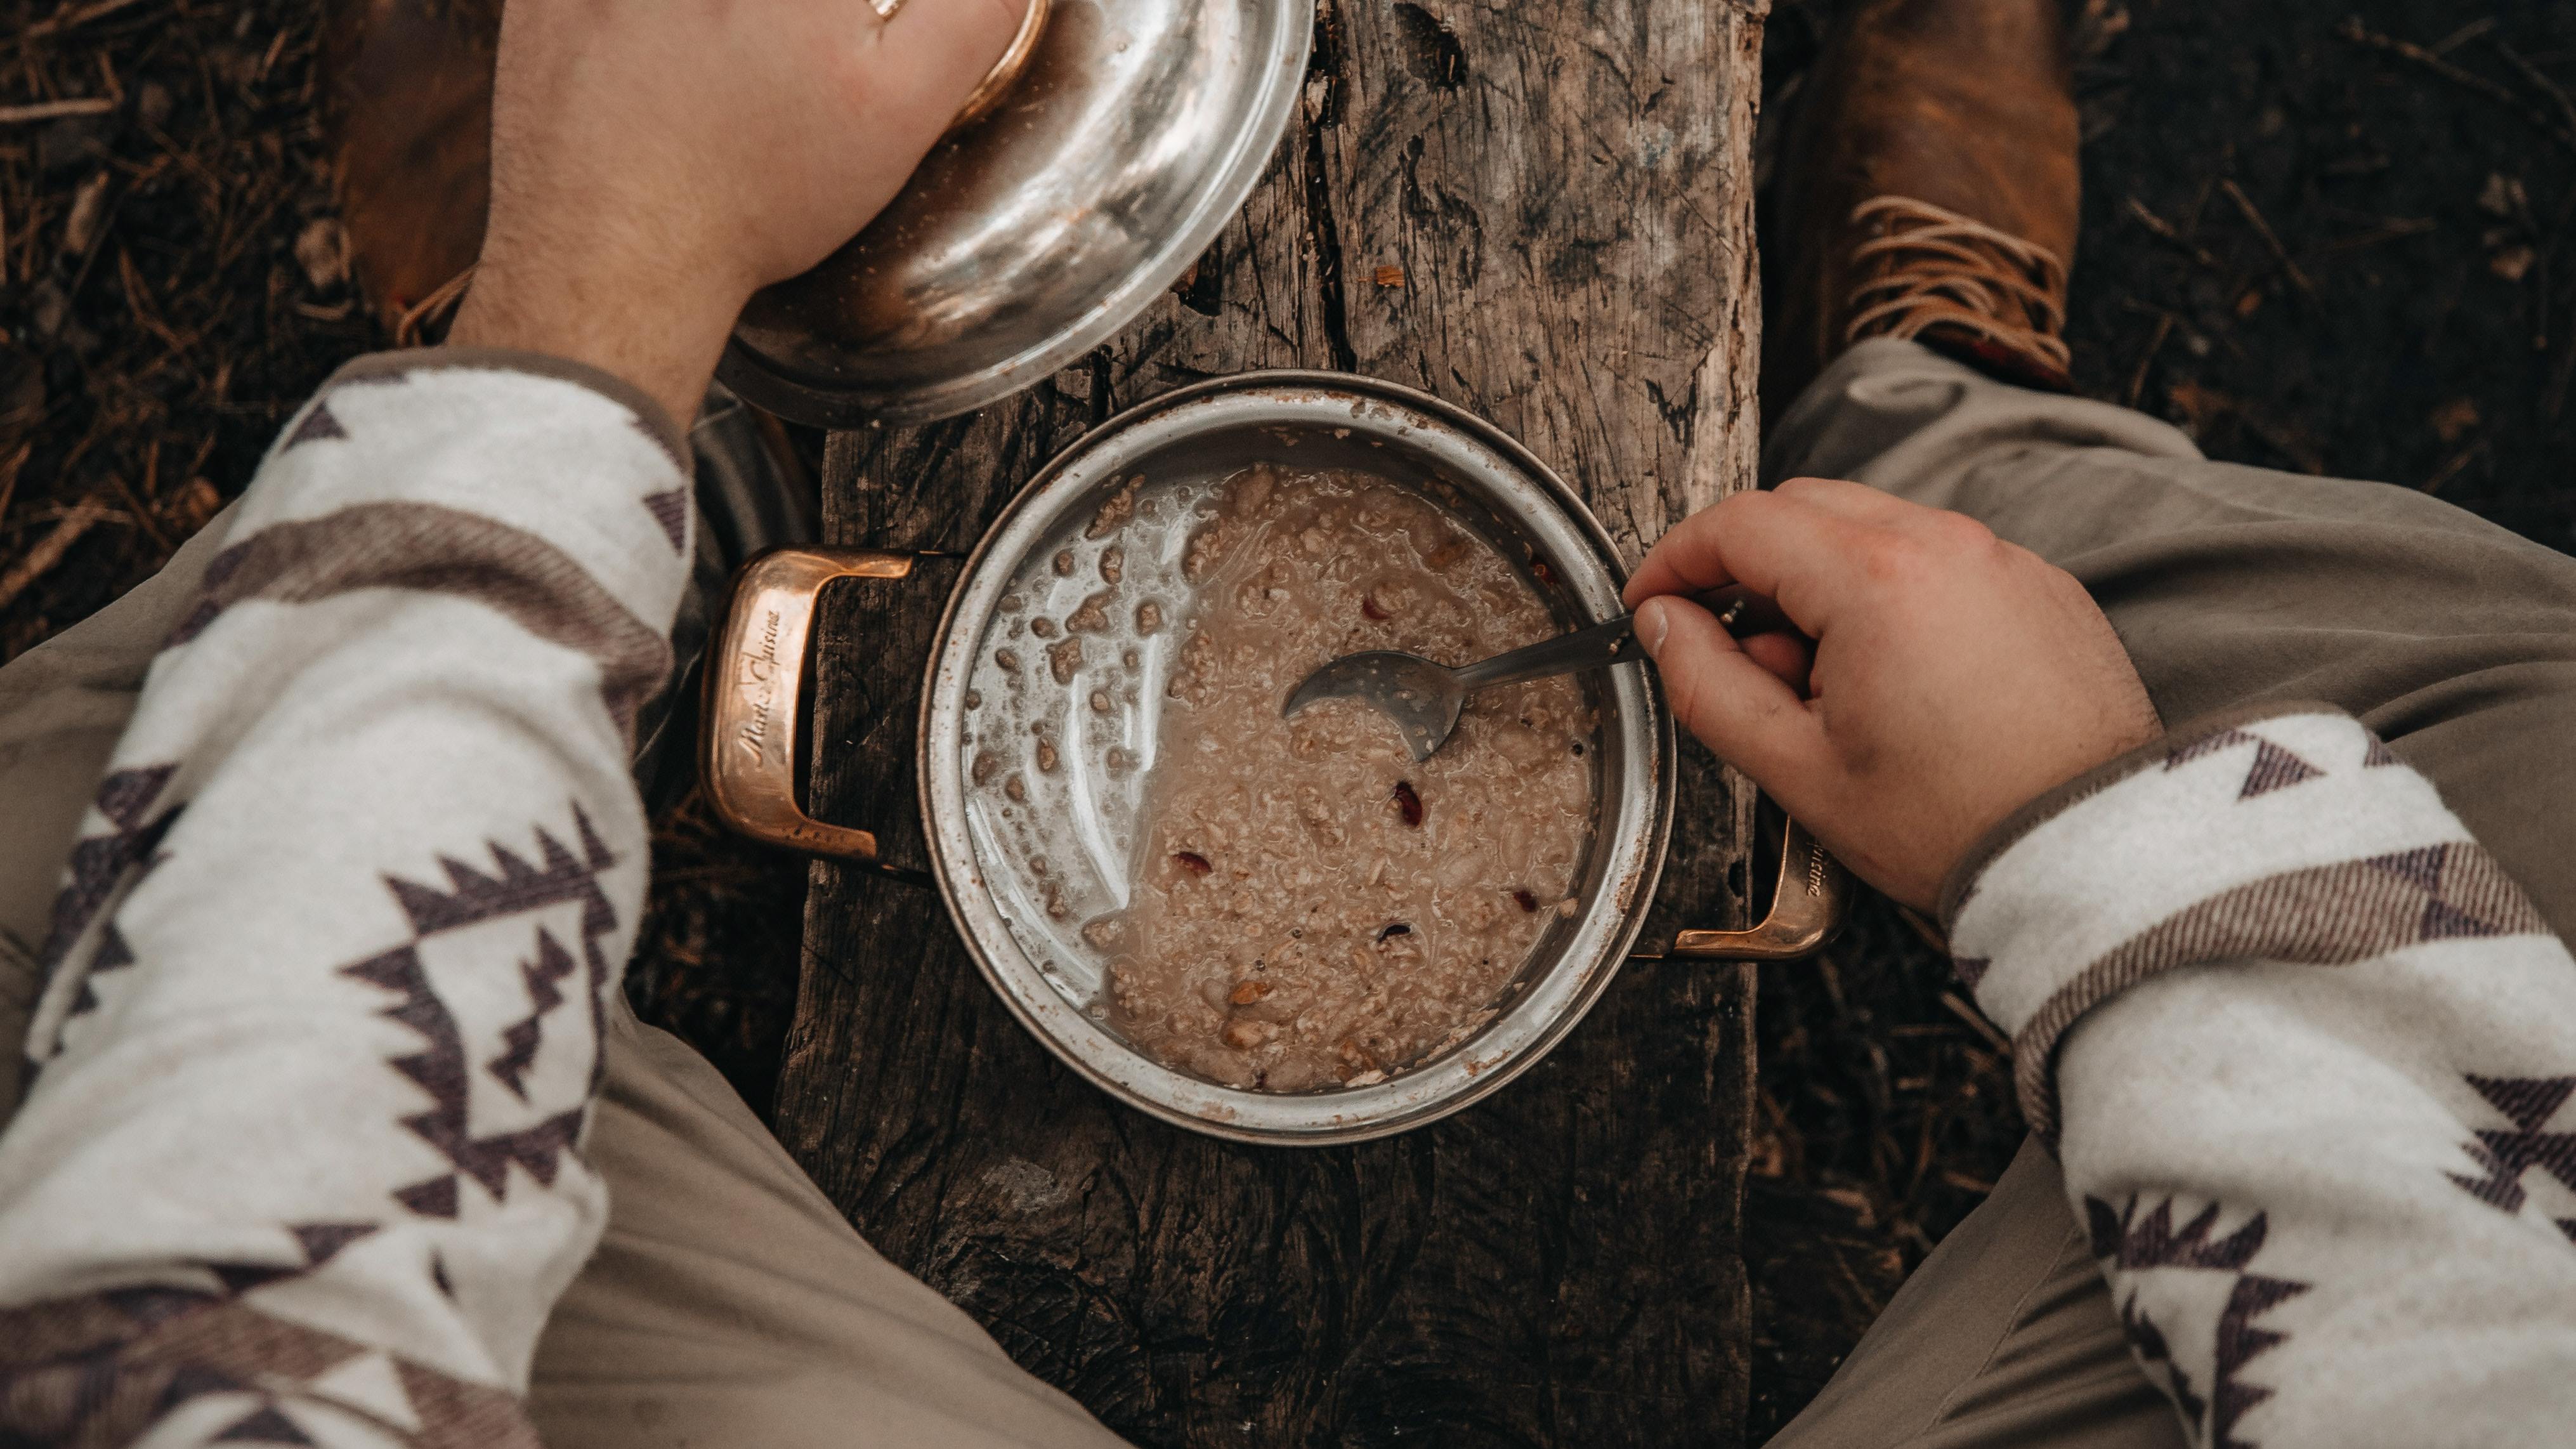 Aerial view of a person preparing oatmeal in a pot outdoors